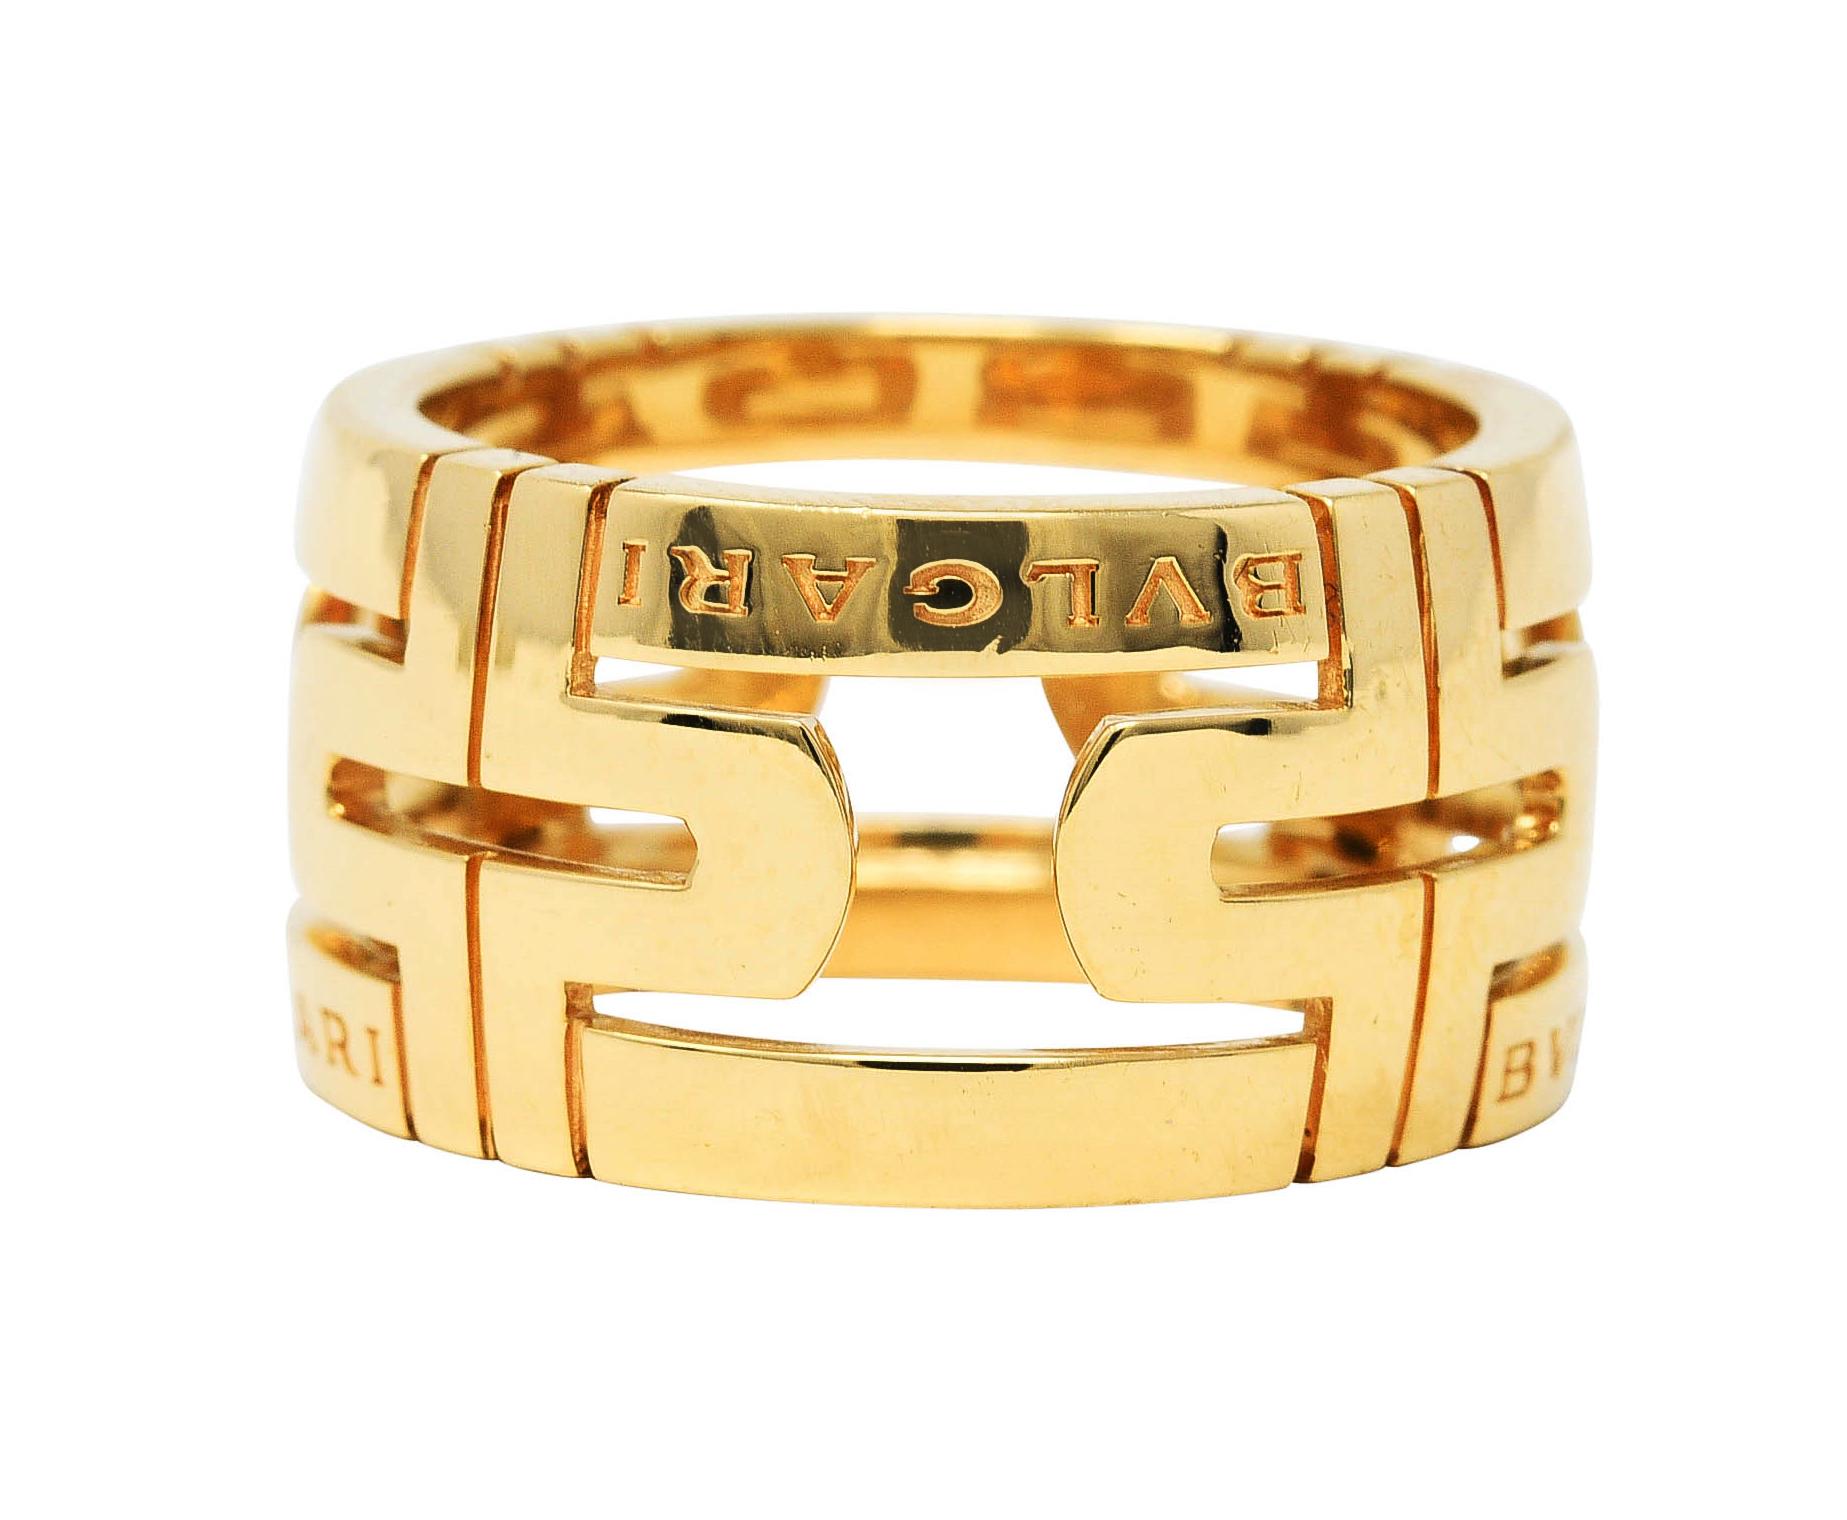 Wide band ring is deeply grooved and pierced with a geometric motif

With the Bvlgari signature front facing and repeated

From the contemporary Parentesi collection

Stamped 'Made in Italy' with Italian assay marks for 18 karat gold

Fully signed